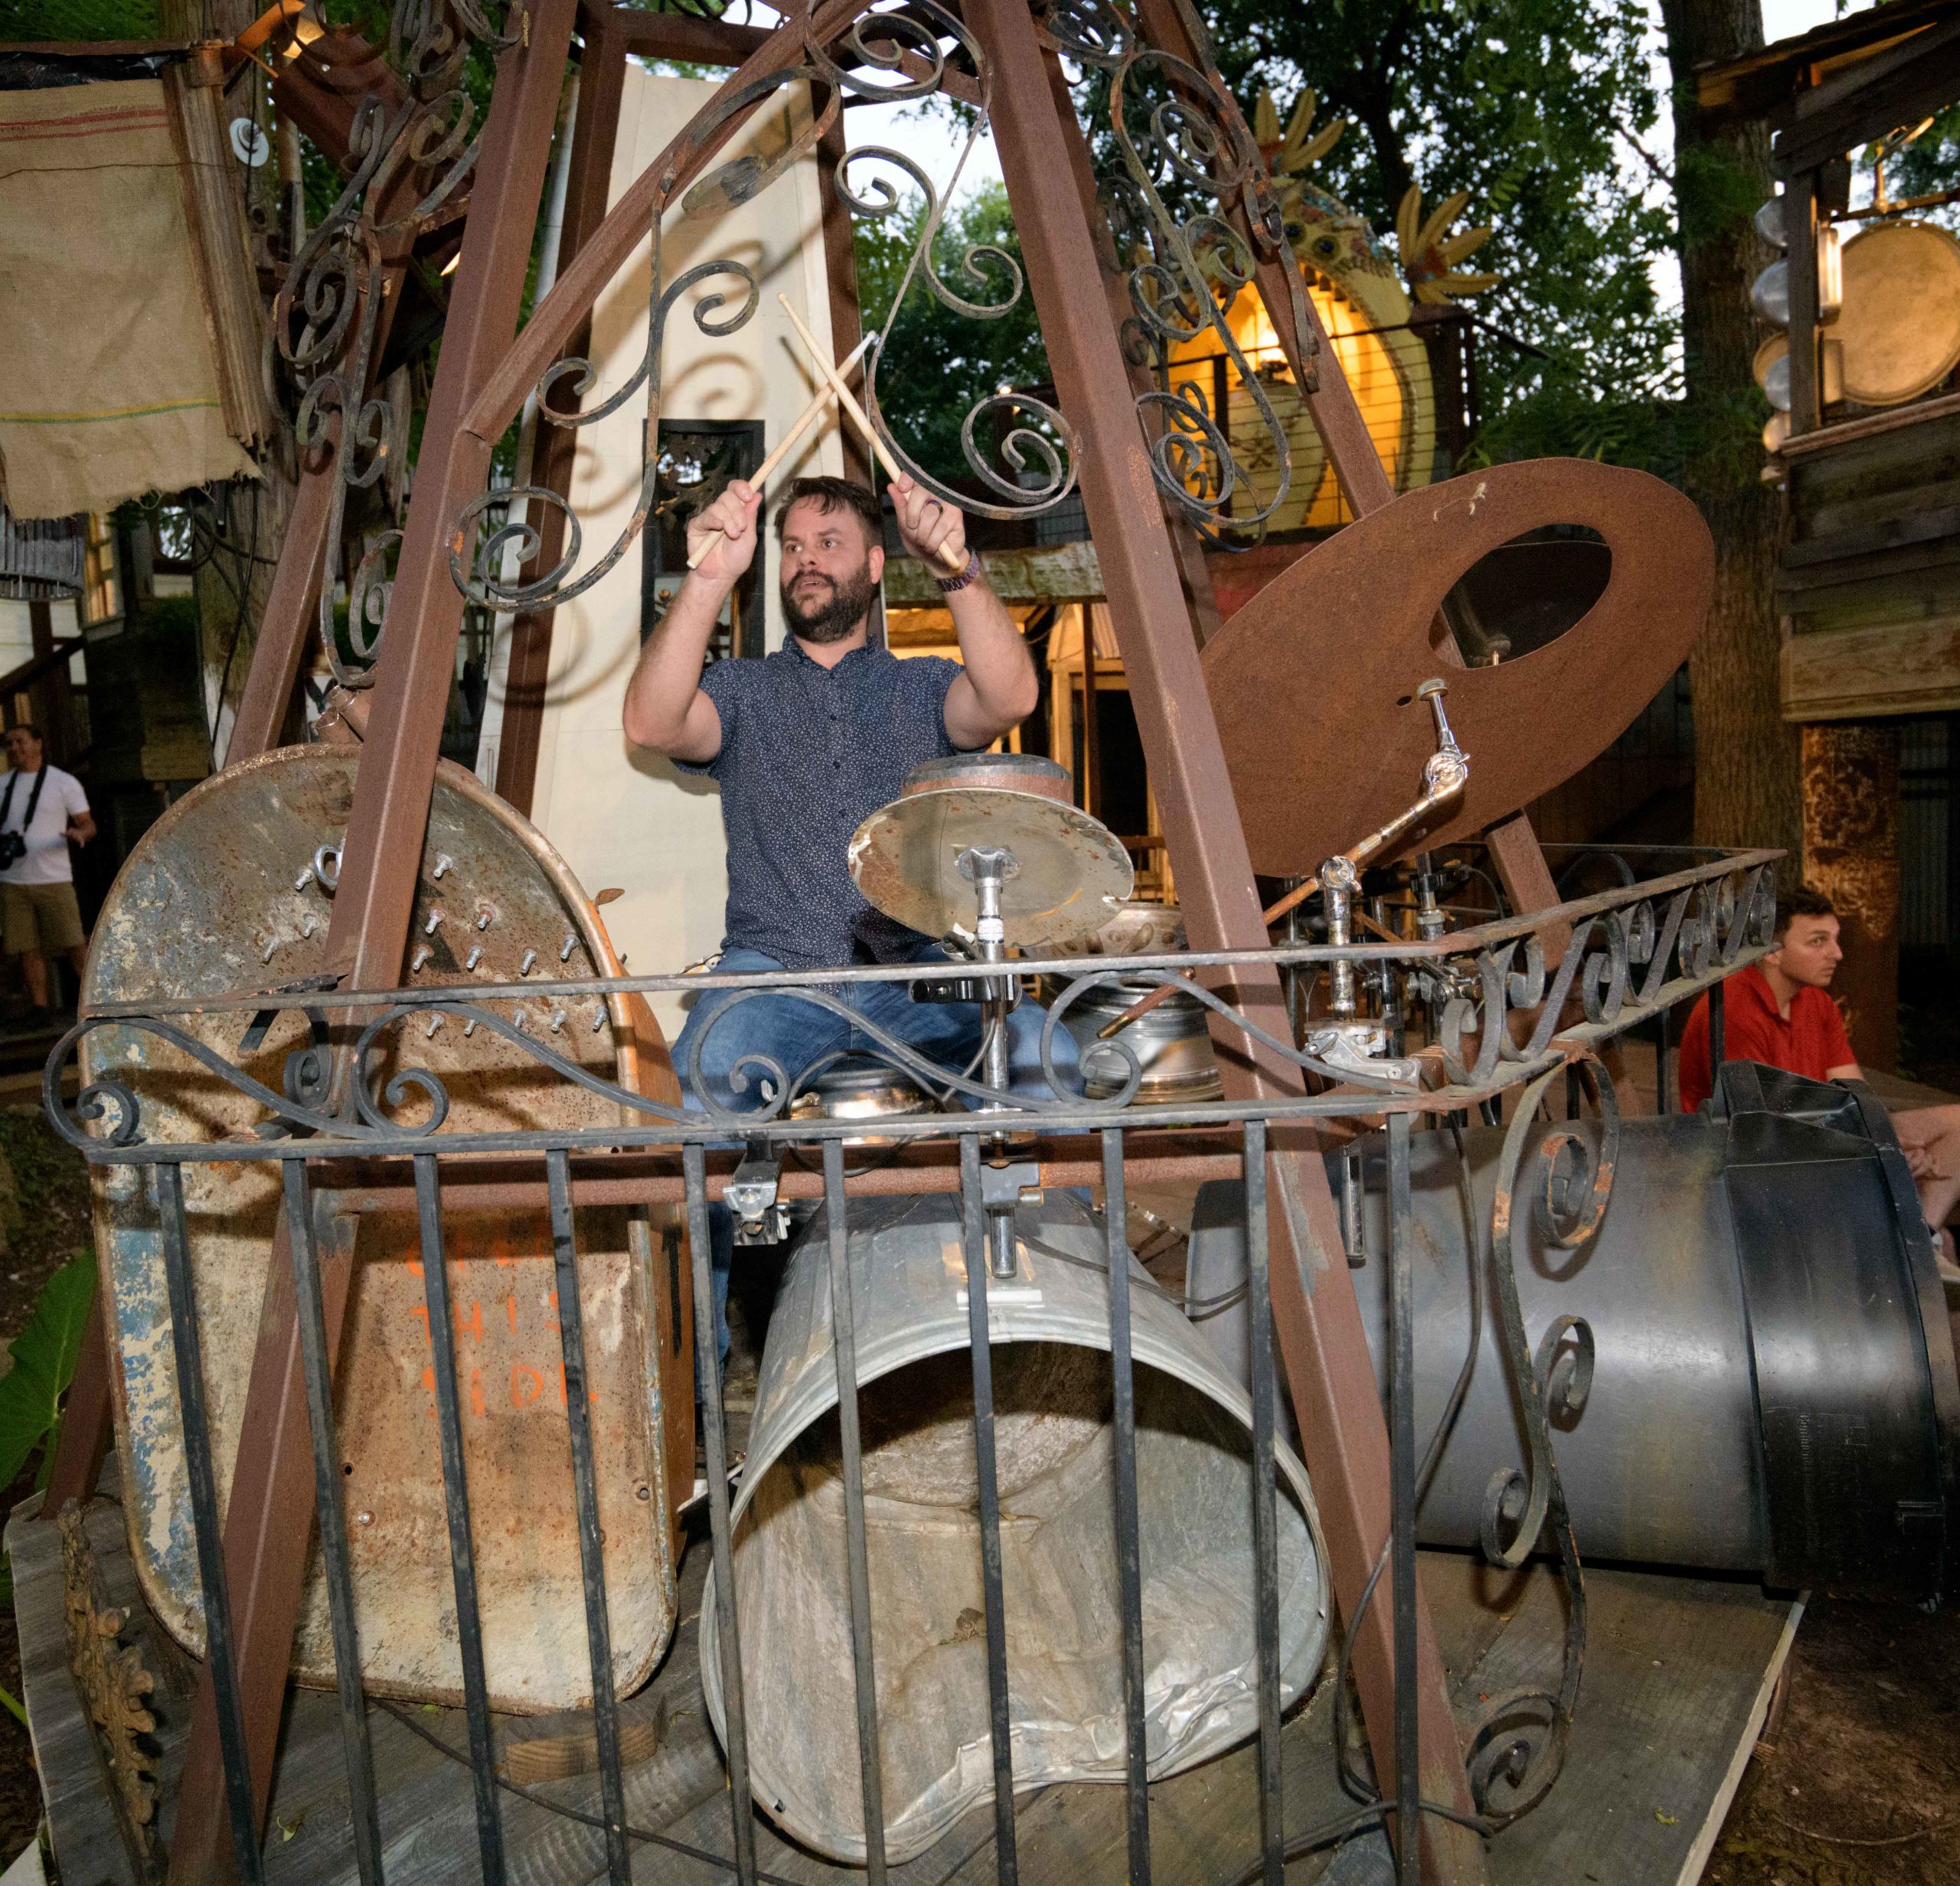 David Welch plays on the Drum Rose and Junkit that mimics a drum set with various pieces of junk including a wheel barrow and trash can on the opening night of 'Elevator Pitch' at Music Box
Village in New Orleans, La. Tuesday, May 21, 2019. A button marked 'David' is one of the screaming voices that can be heard in the 'Elevator Pitch' art piece as one of the deaf voices of Louisiana. Photo by Matthew Hinton